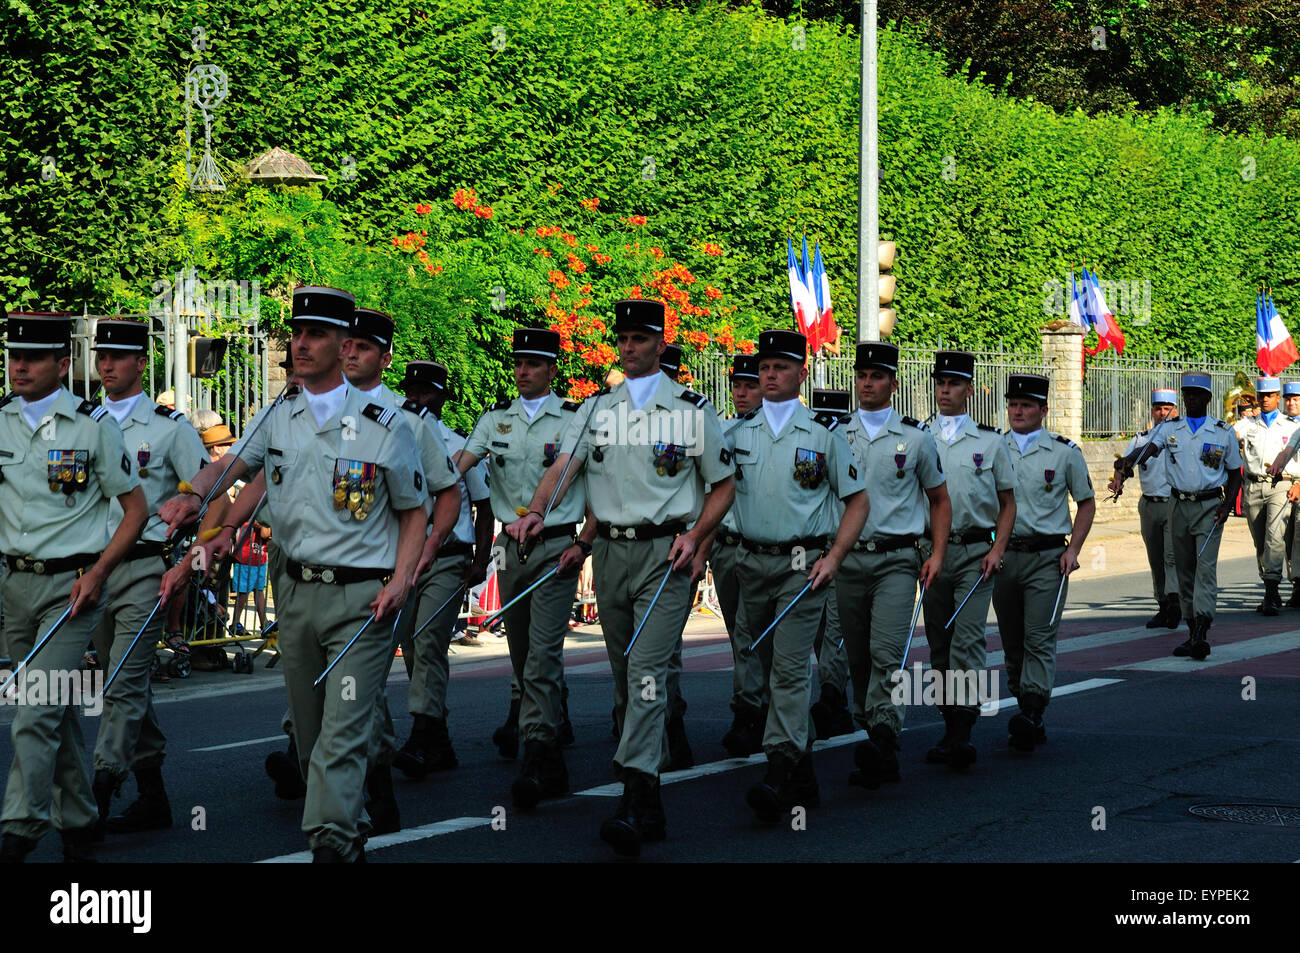 14th July Parade in Bourges, France Stock Photo